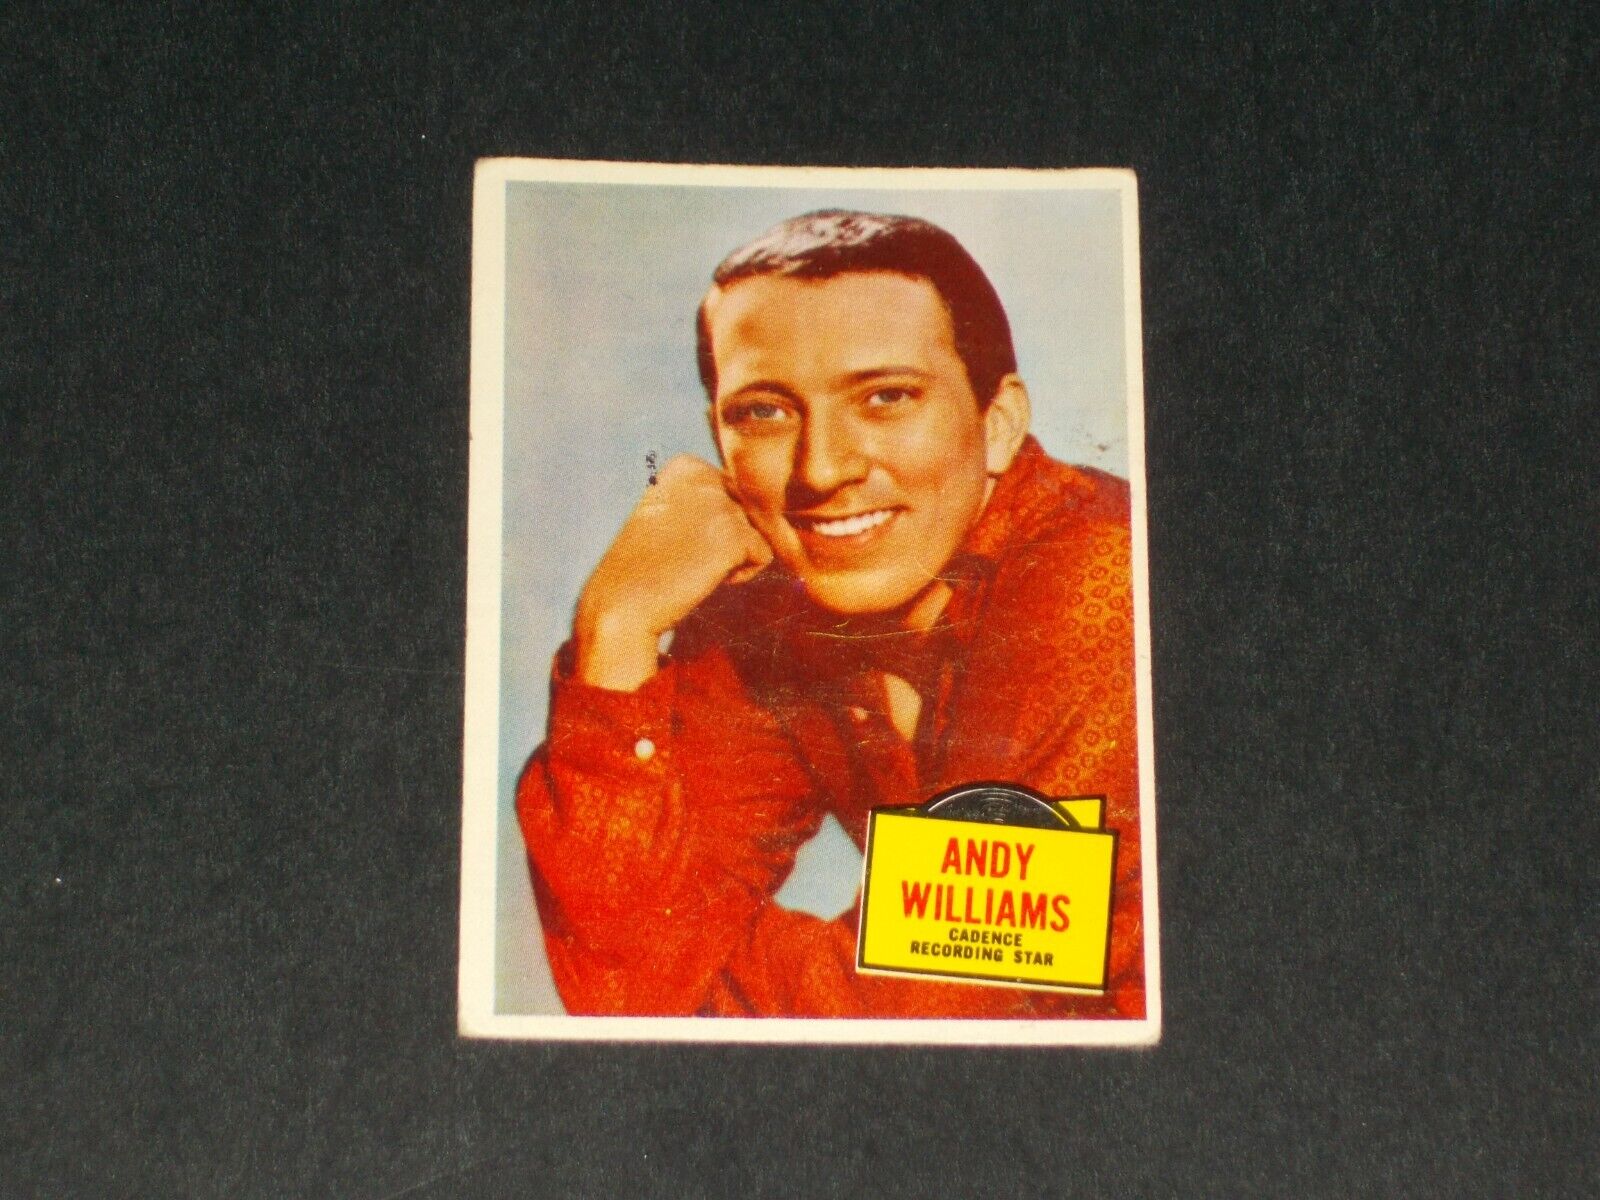 Hit Stars (R710-3), Topps, #55 Andy Williams, VERY NICE CARD 